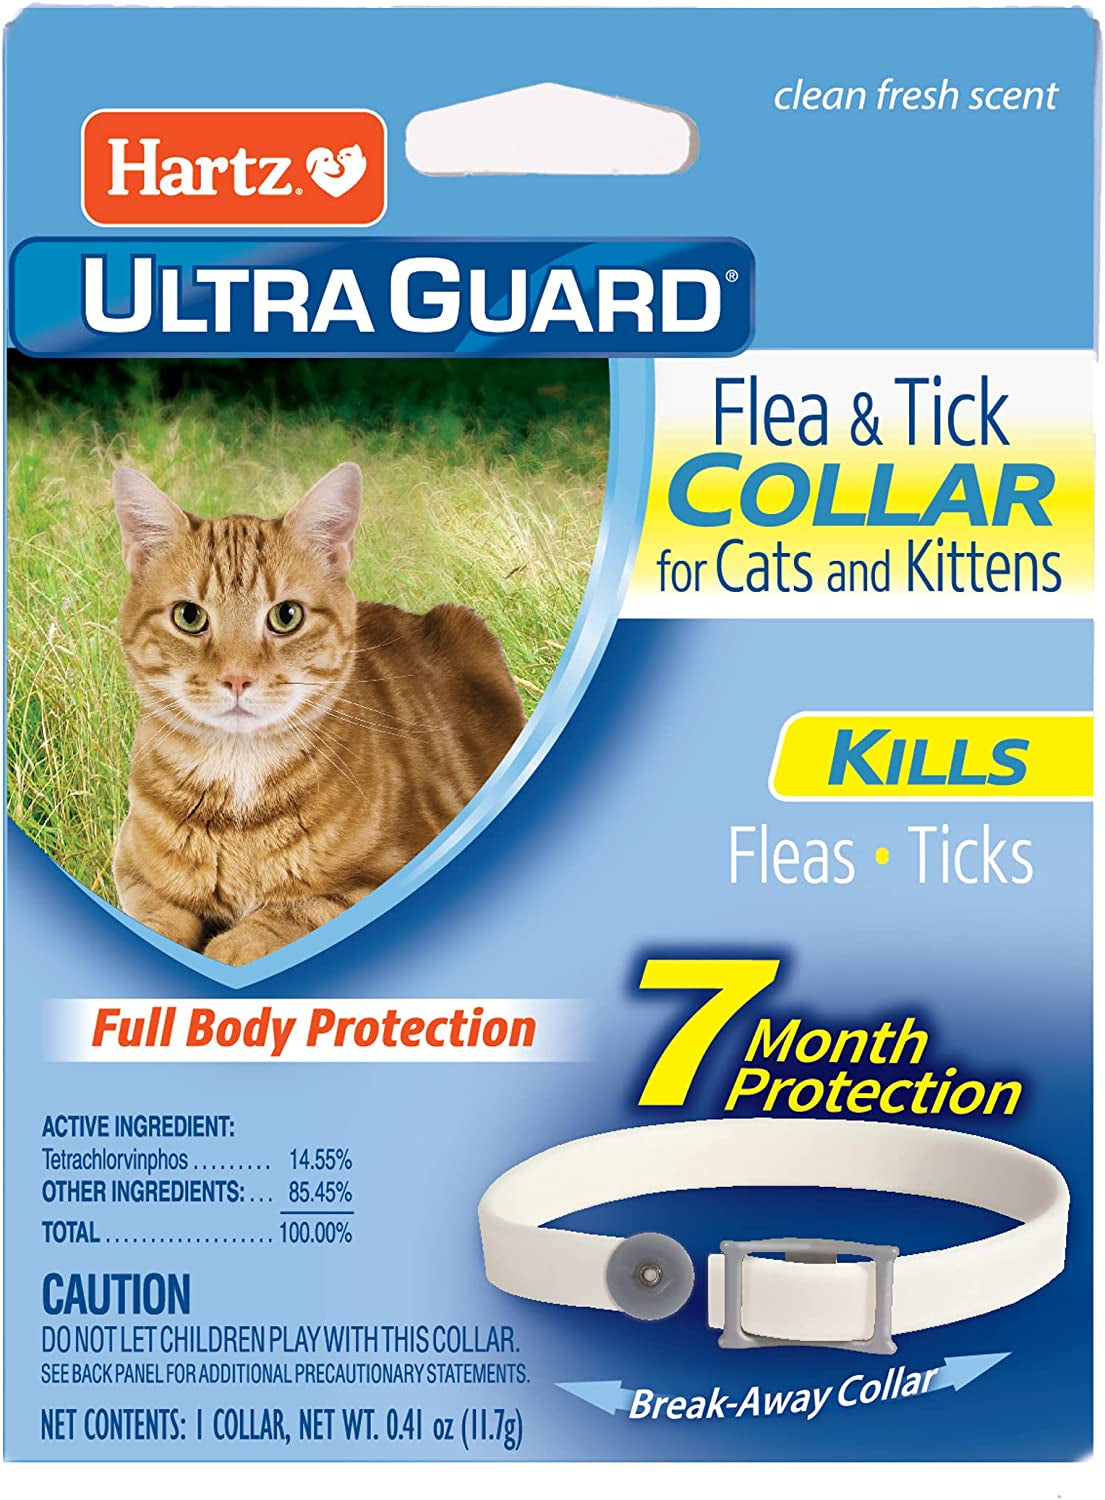 Hartz Ultraguard Flea & Tick Collar for Cats and Kittens, 7 Month Flea and Tick Protection and Prevention, White